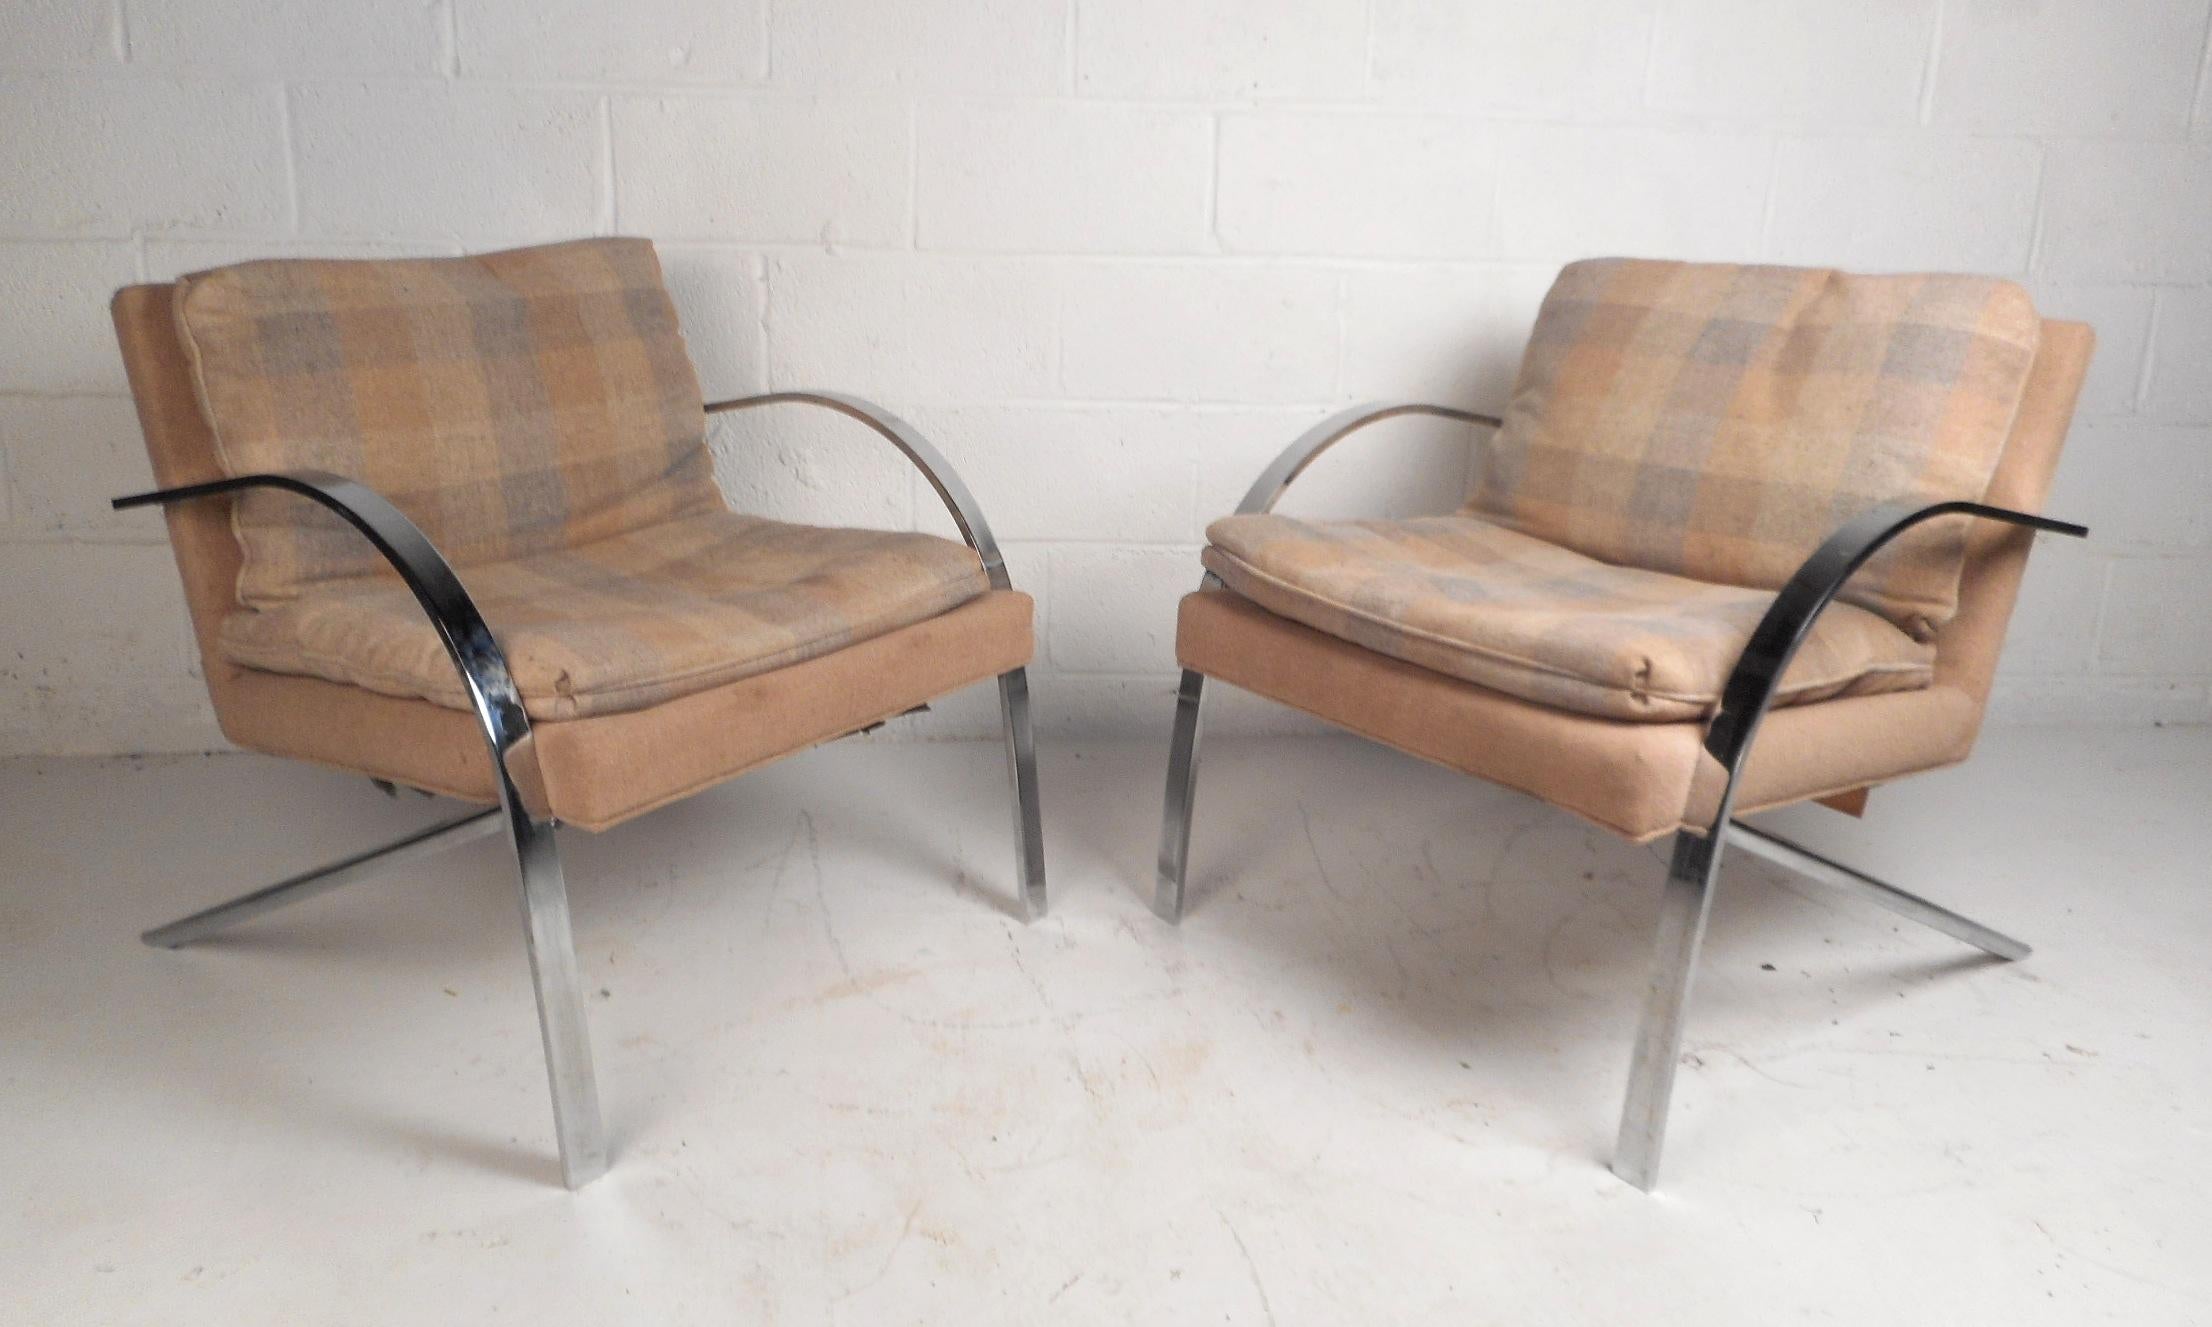 This stunning pair of vintage modern lounge chairs features heavy flat bar chrome frames and thick padded cushions. A one of a kind pair with rounded arm rests, angled back legs, and two overstuffed removable cushions. The sleek design is